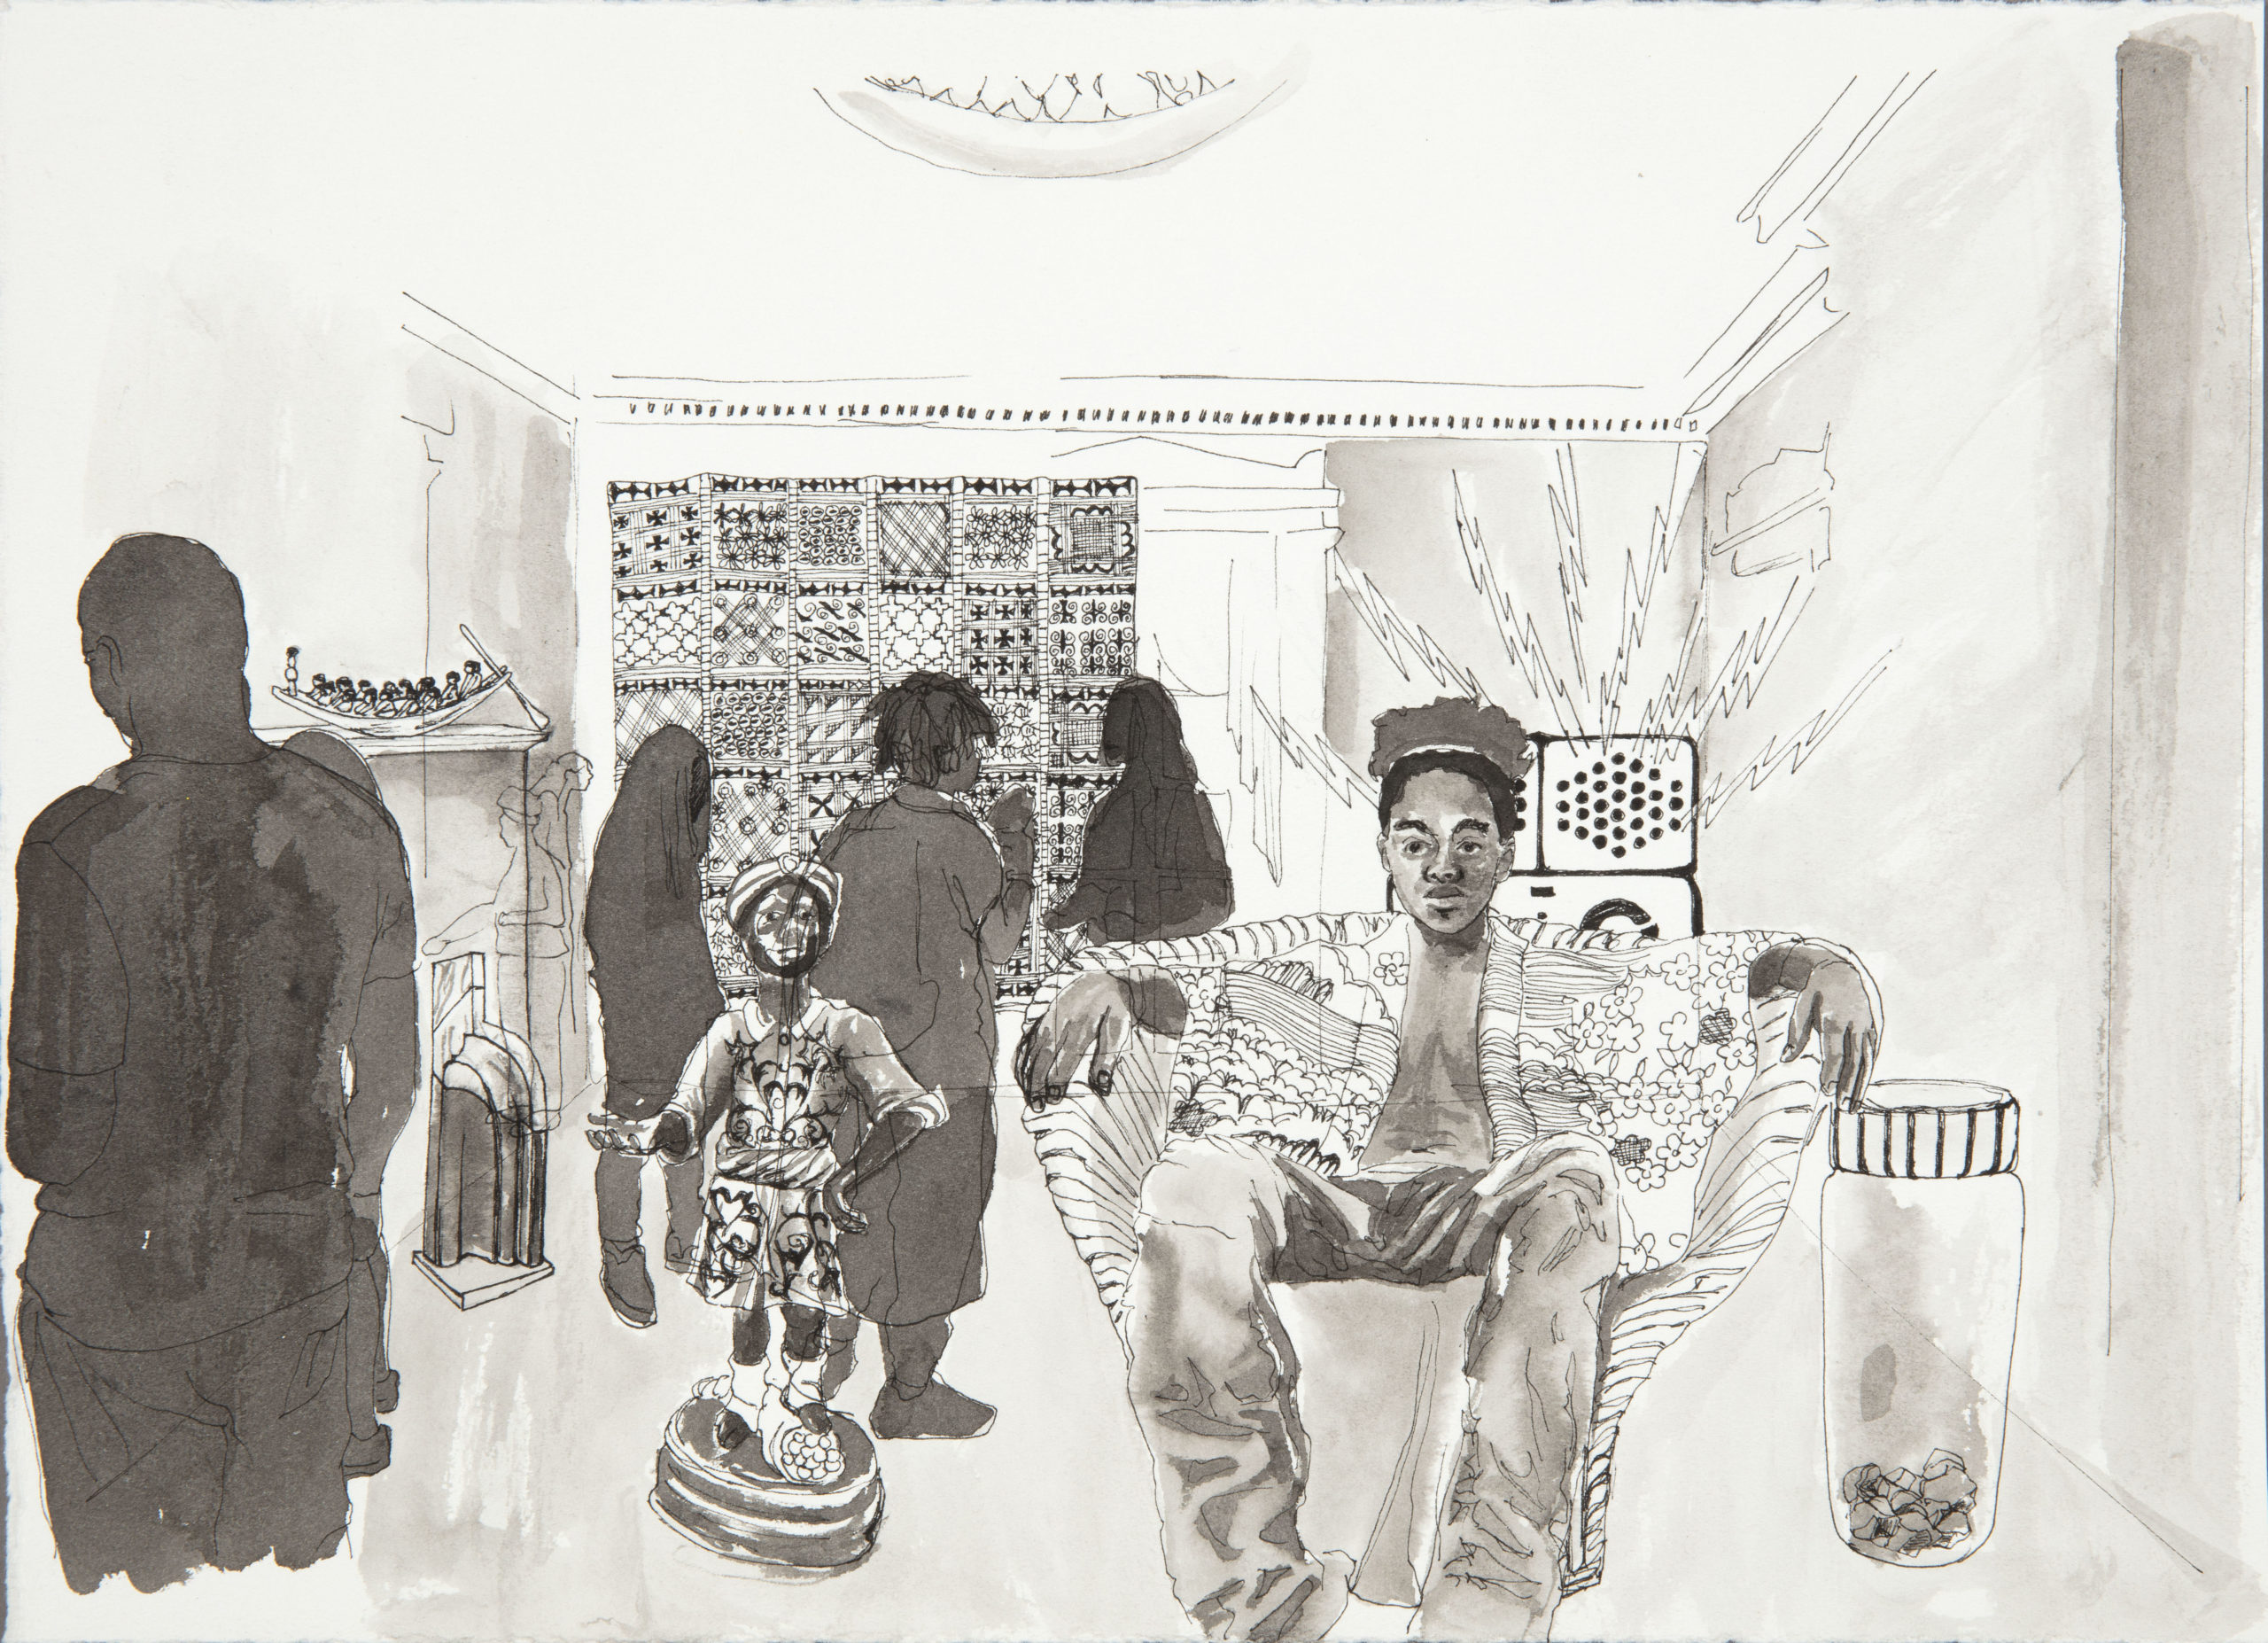 A black ink line drawing with washes of dark grey on off white paper depicting what appears to be a scene of people viewing an art exhibition. On the right a dark-skinned figure sits facing the viewer on a round-backed chair, to the figure's left is a blackamoor sculpture of an ornately dressed, very dark-skinned figure. To its left and behind is an array of figures, rendered in dark grey shadow, viewing various artifacts around the room, including a sculpture of a boat filled with figures, an ornate hanging tapestry and a radio blasting sound represented with jagged lines.